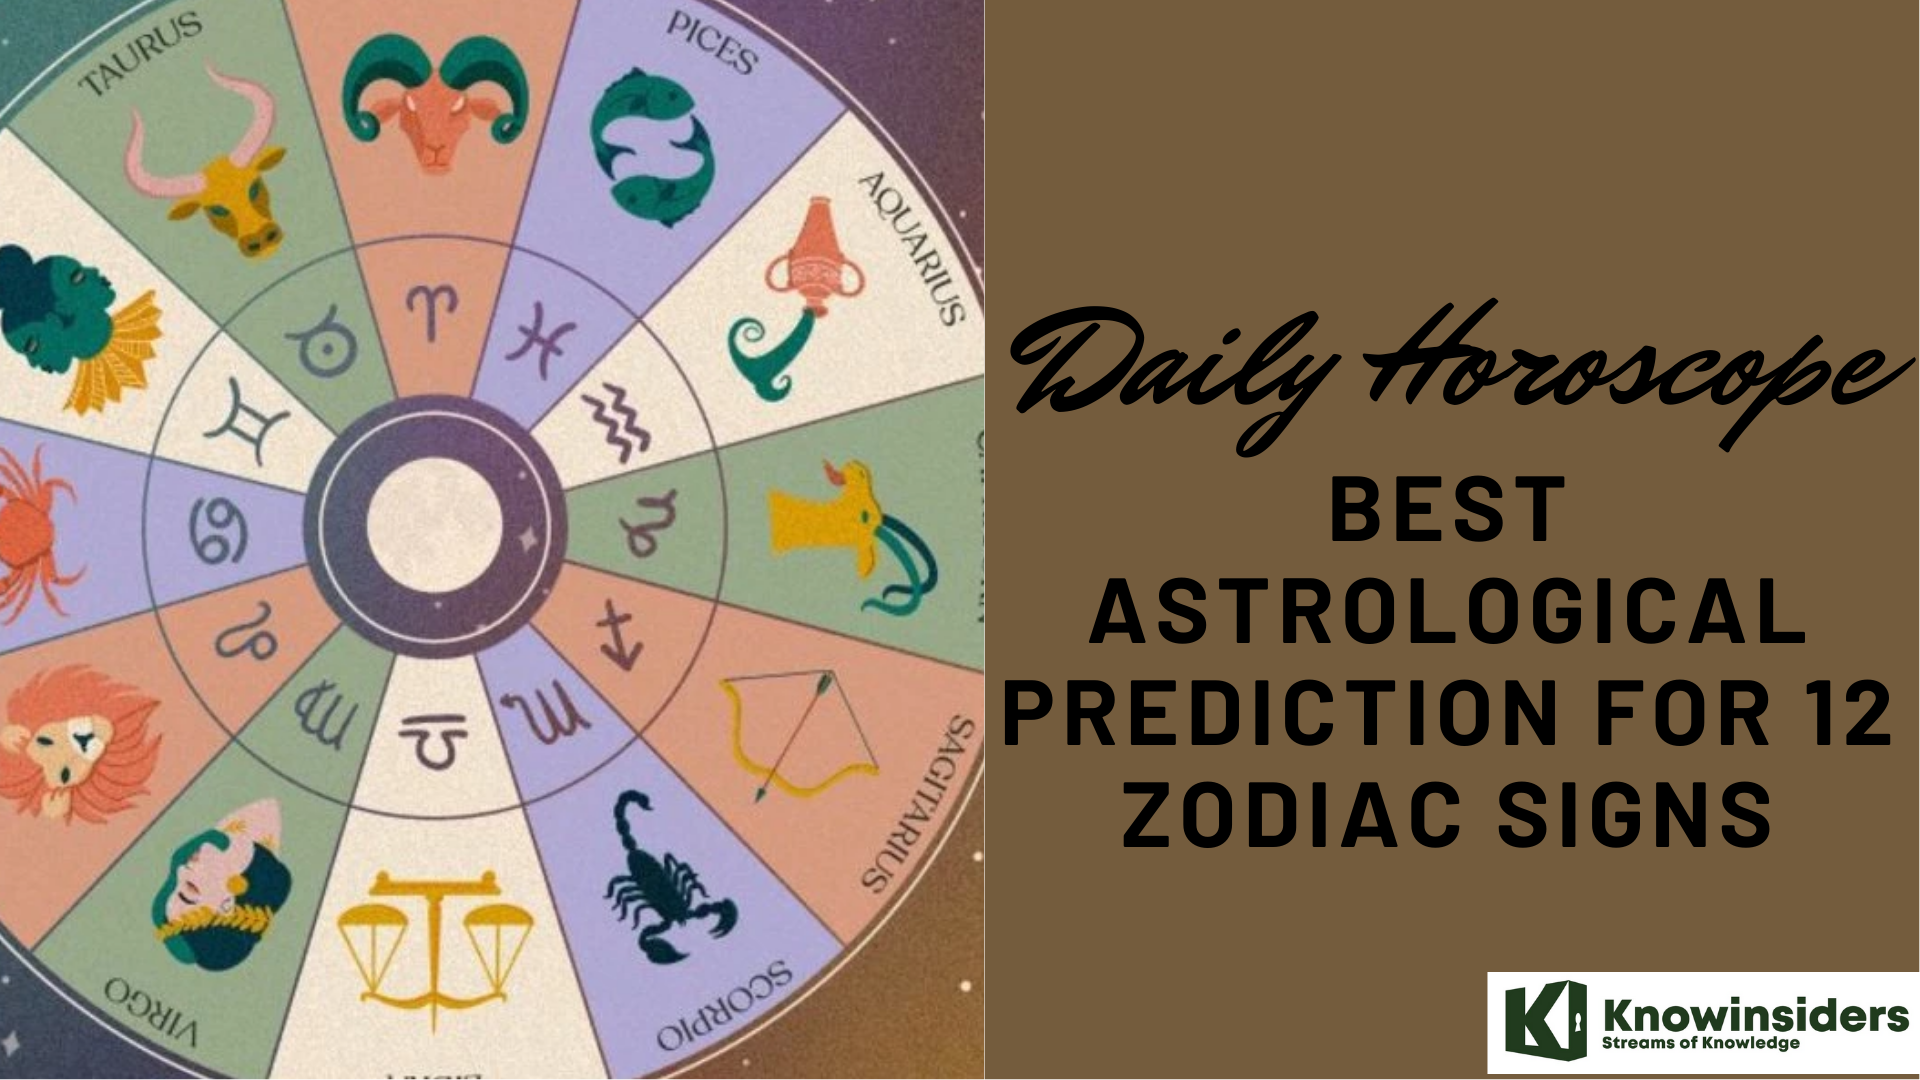 Daily Horoscope (June 4, 2022): Best Astrological Prediction for 12 Zodiac Signs